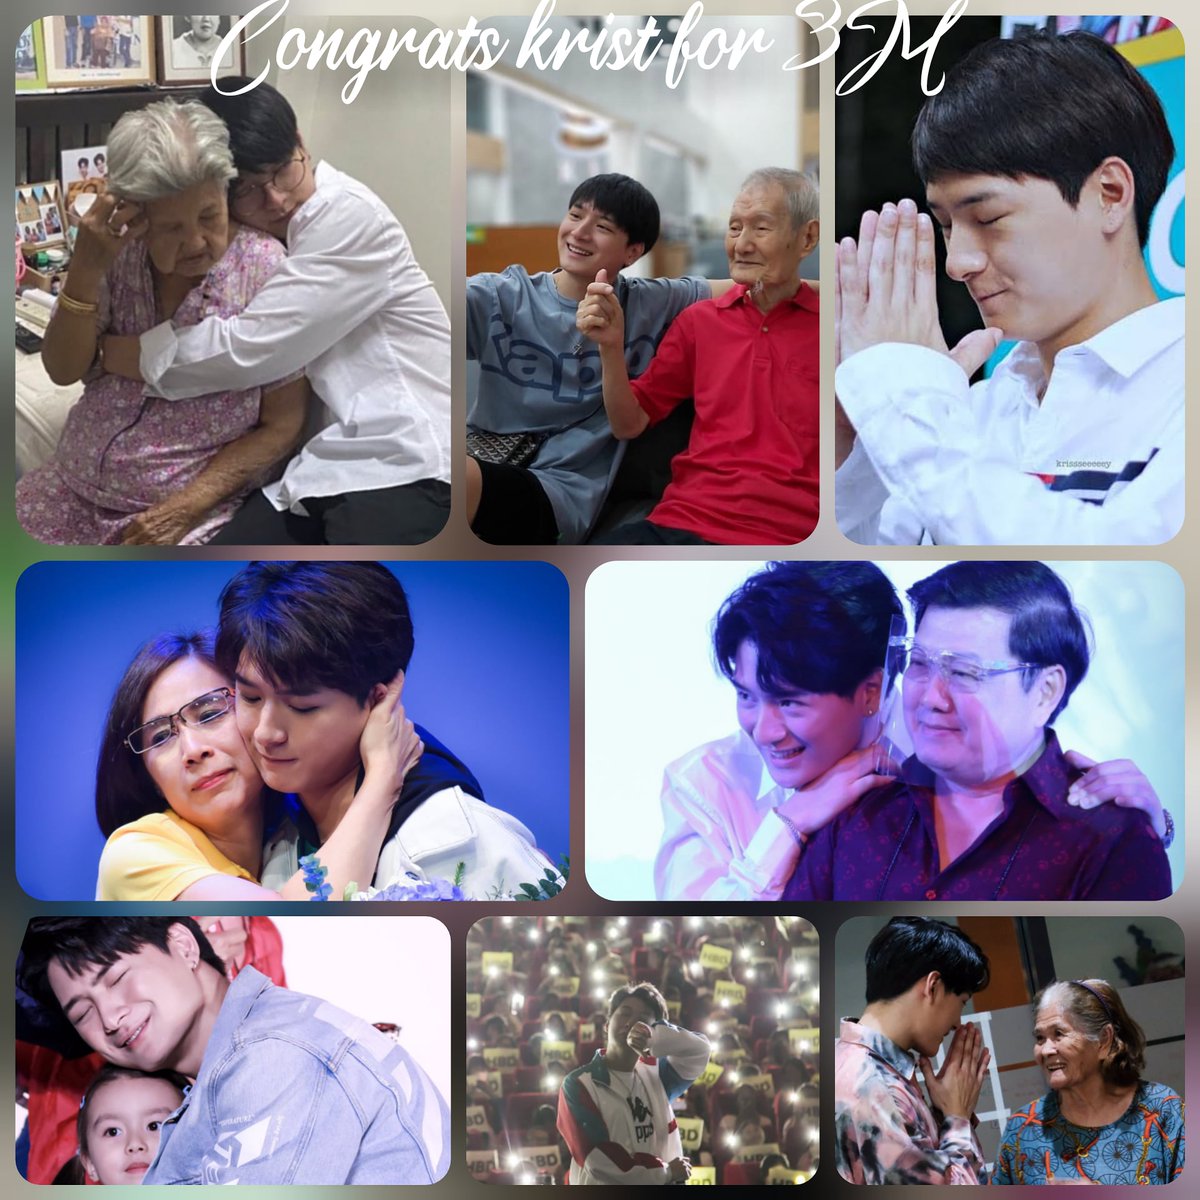 #warmfamily #mylittlebrother❤️ #KristPerawat #very #lovely #kindhearted #soul ... #lotsoflove❤️ and #support you #always kitcat 💕💕💕 ctto pic click📷  #3MillionWithKrist @kristtps #GodBlessYou kitcat.